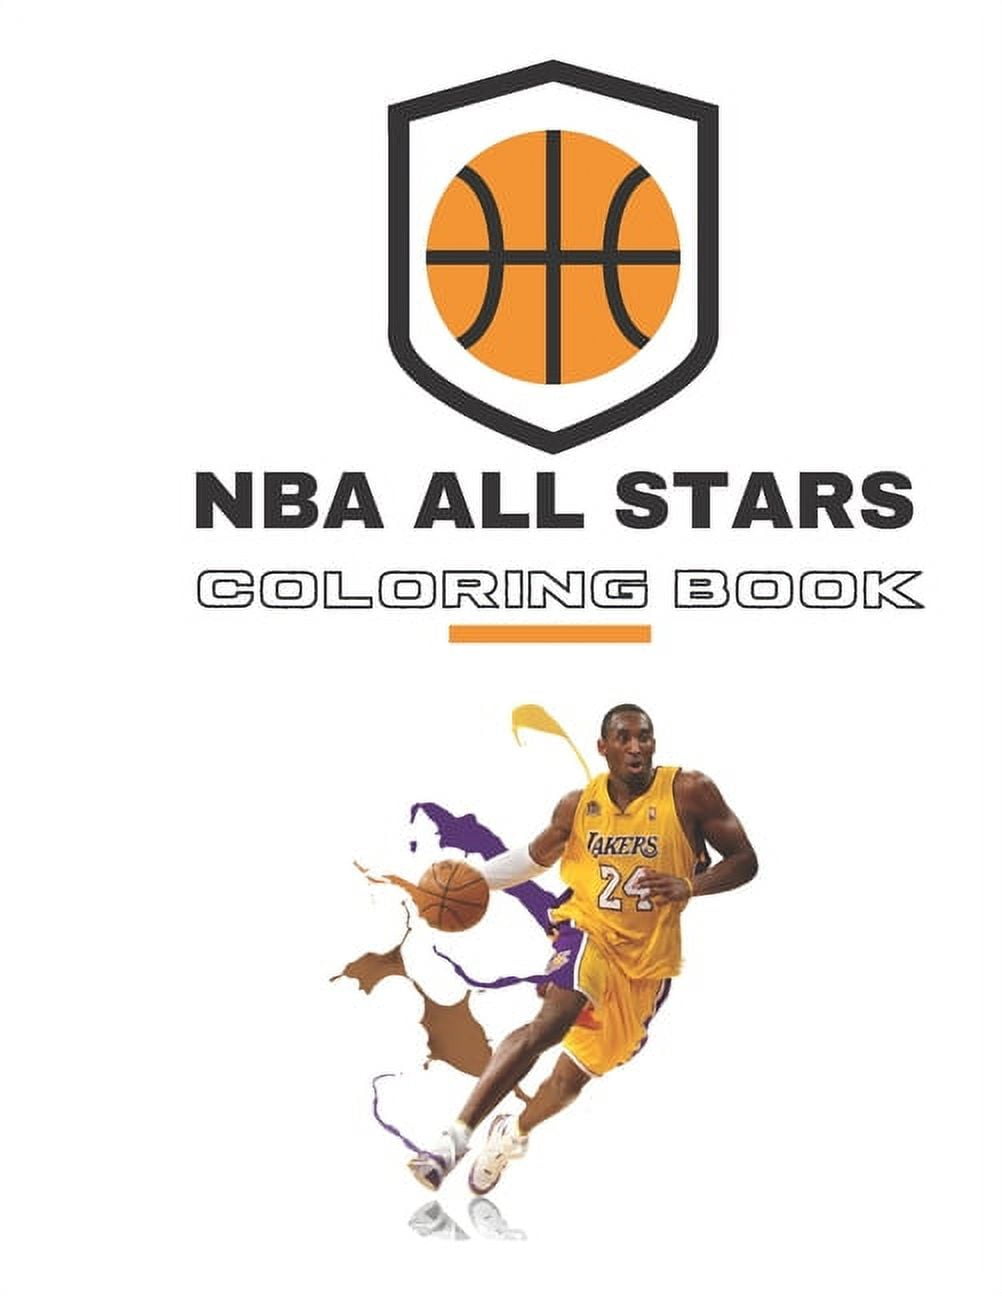 Nba all stars coloring book nba coloring book with most all stars players stephen curry lebron james kevin durant kawhi leonard james alexander and others paperback